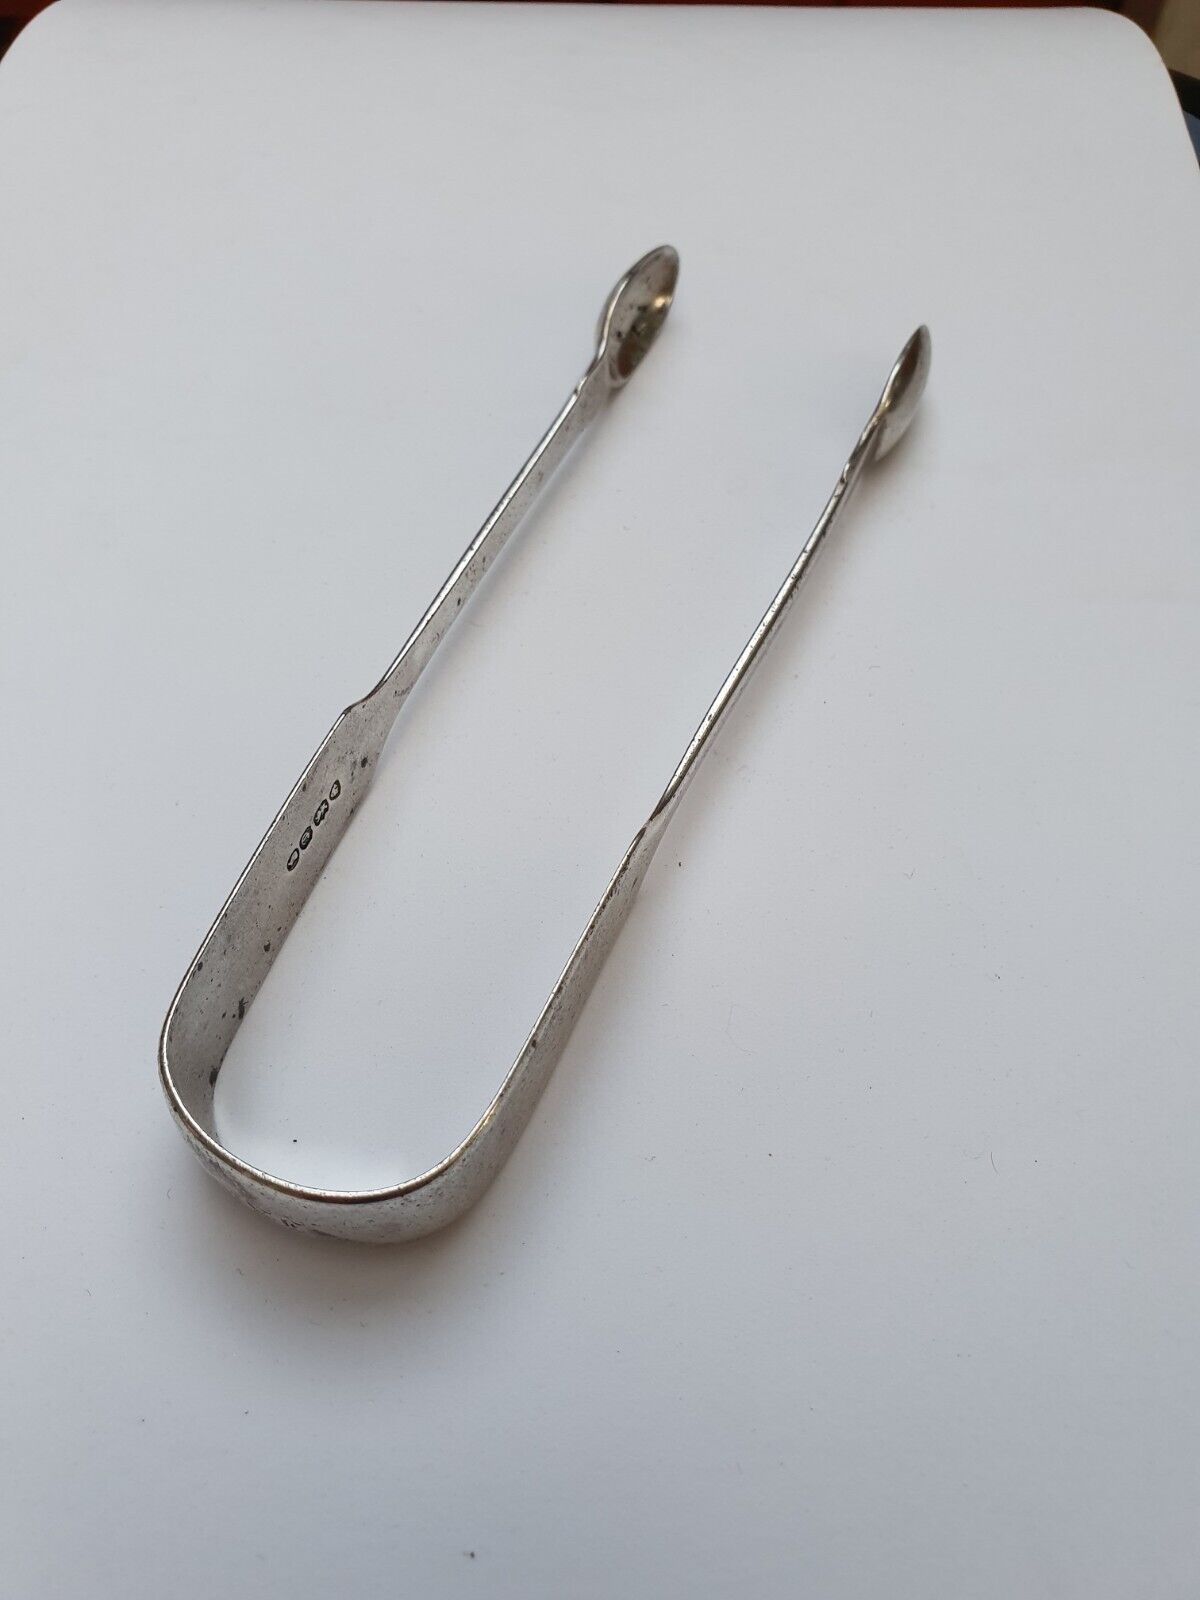 Antique Valuations: Antique William IV Hallmarked 1838 London STERLING SILVER Sugar Tongs (45g)